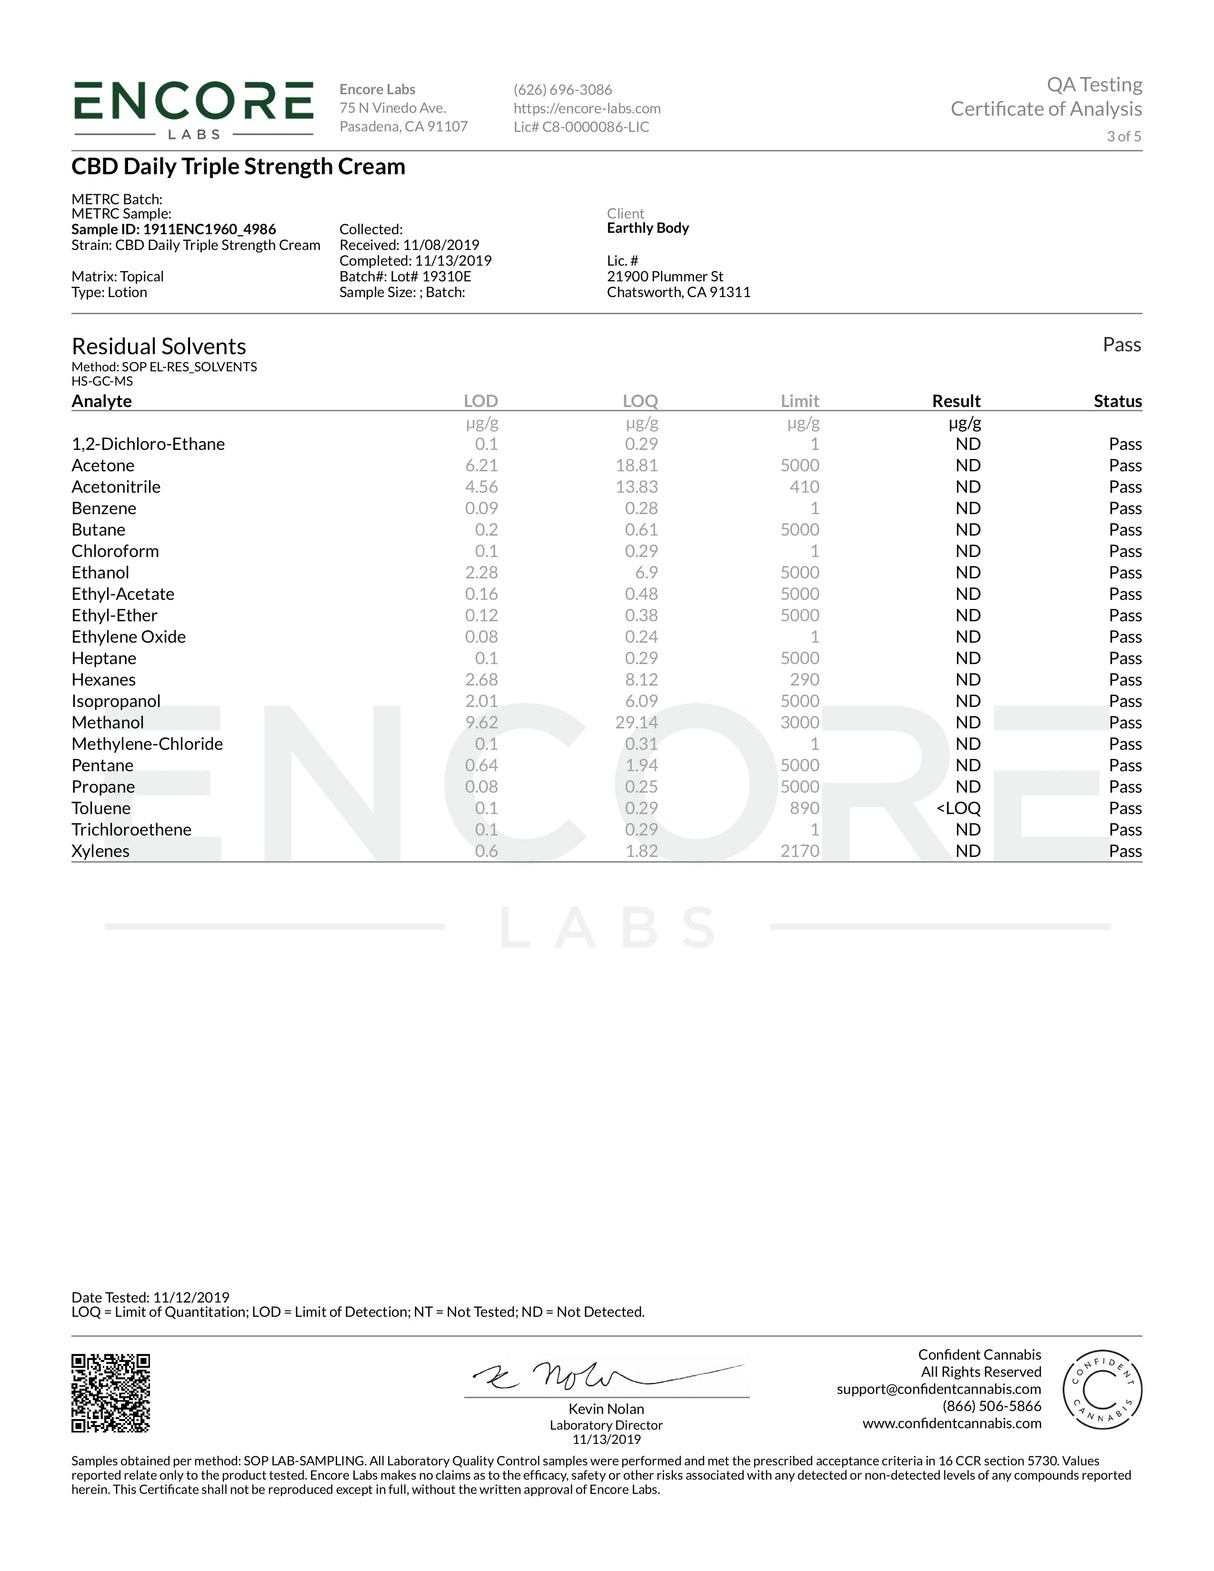 Encore Labs certificate of analysis for Earthly Body CBD Daily Intensive Cream, detailing purity and ingredients.